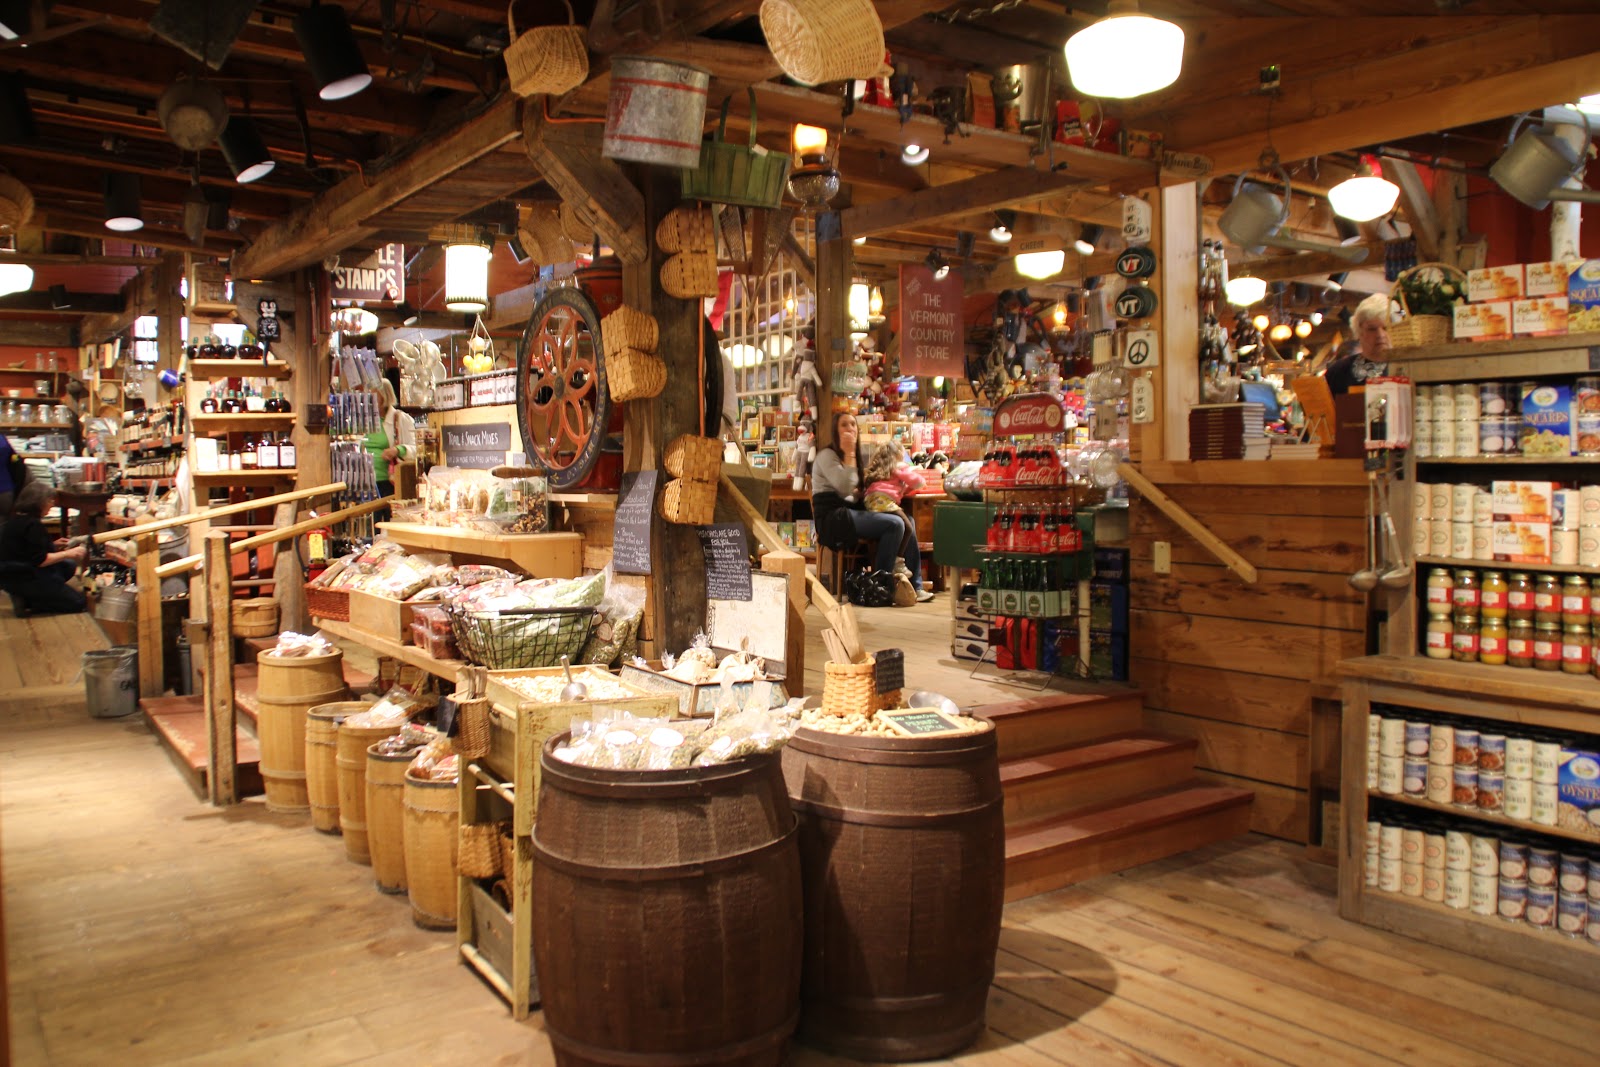 The Mr. Hunter Wall: Shopping at the Vermont Country Store